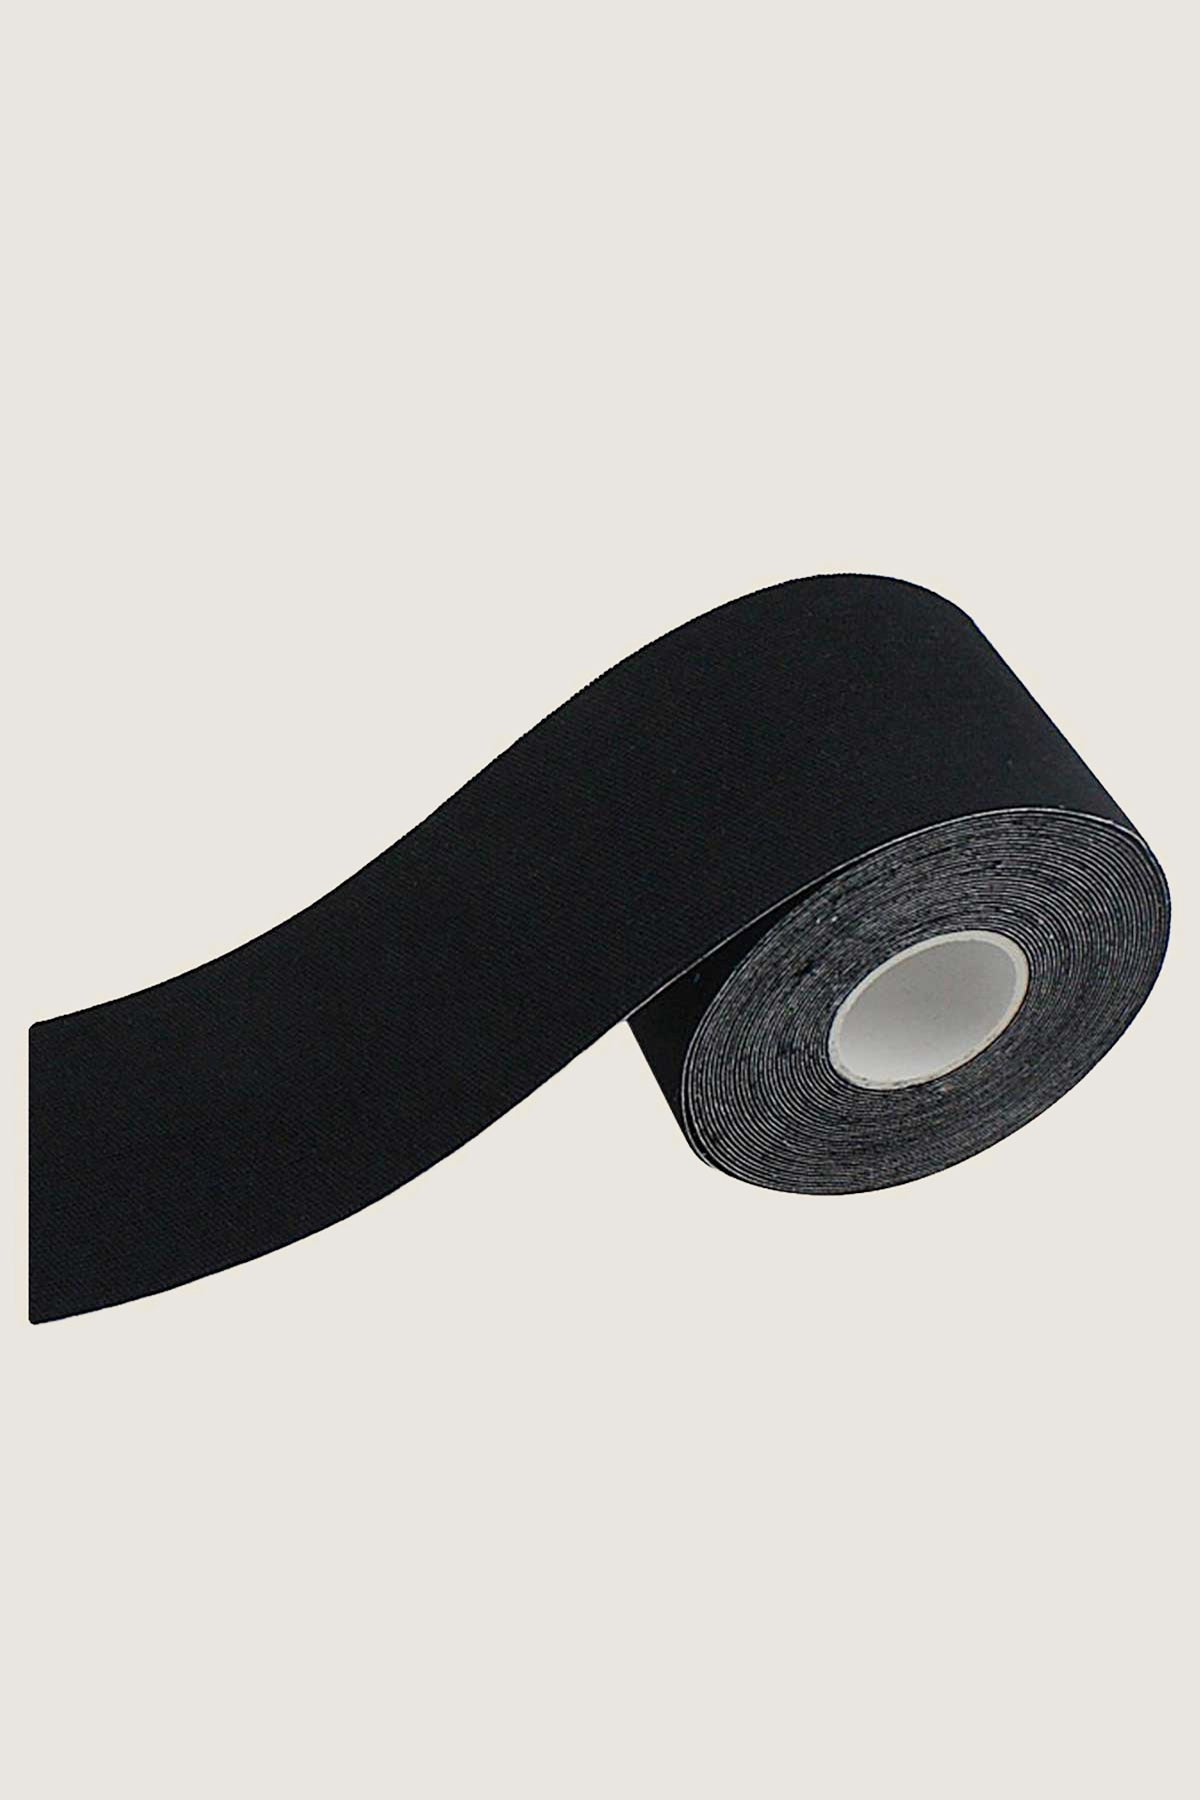 Booby Tape Booby Tape Black